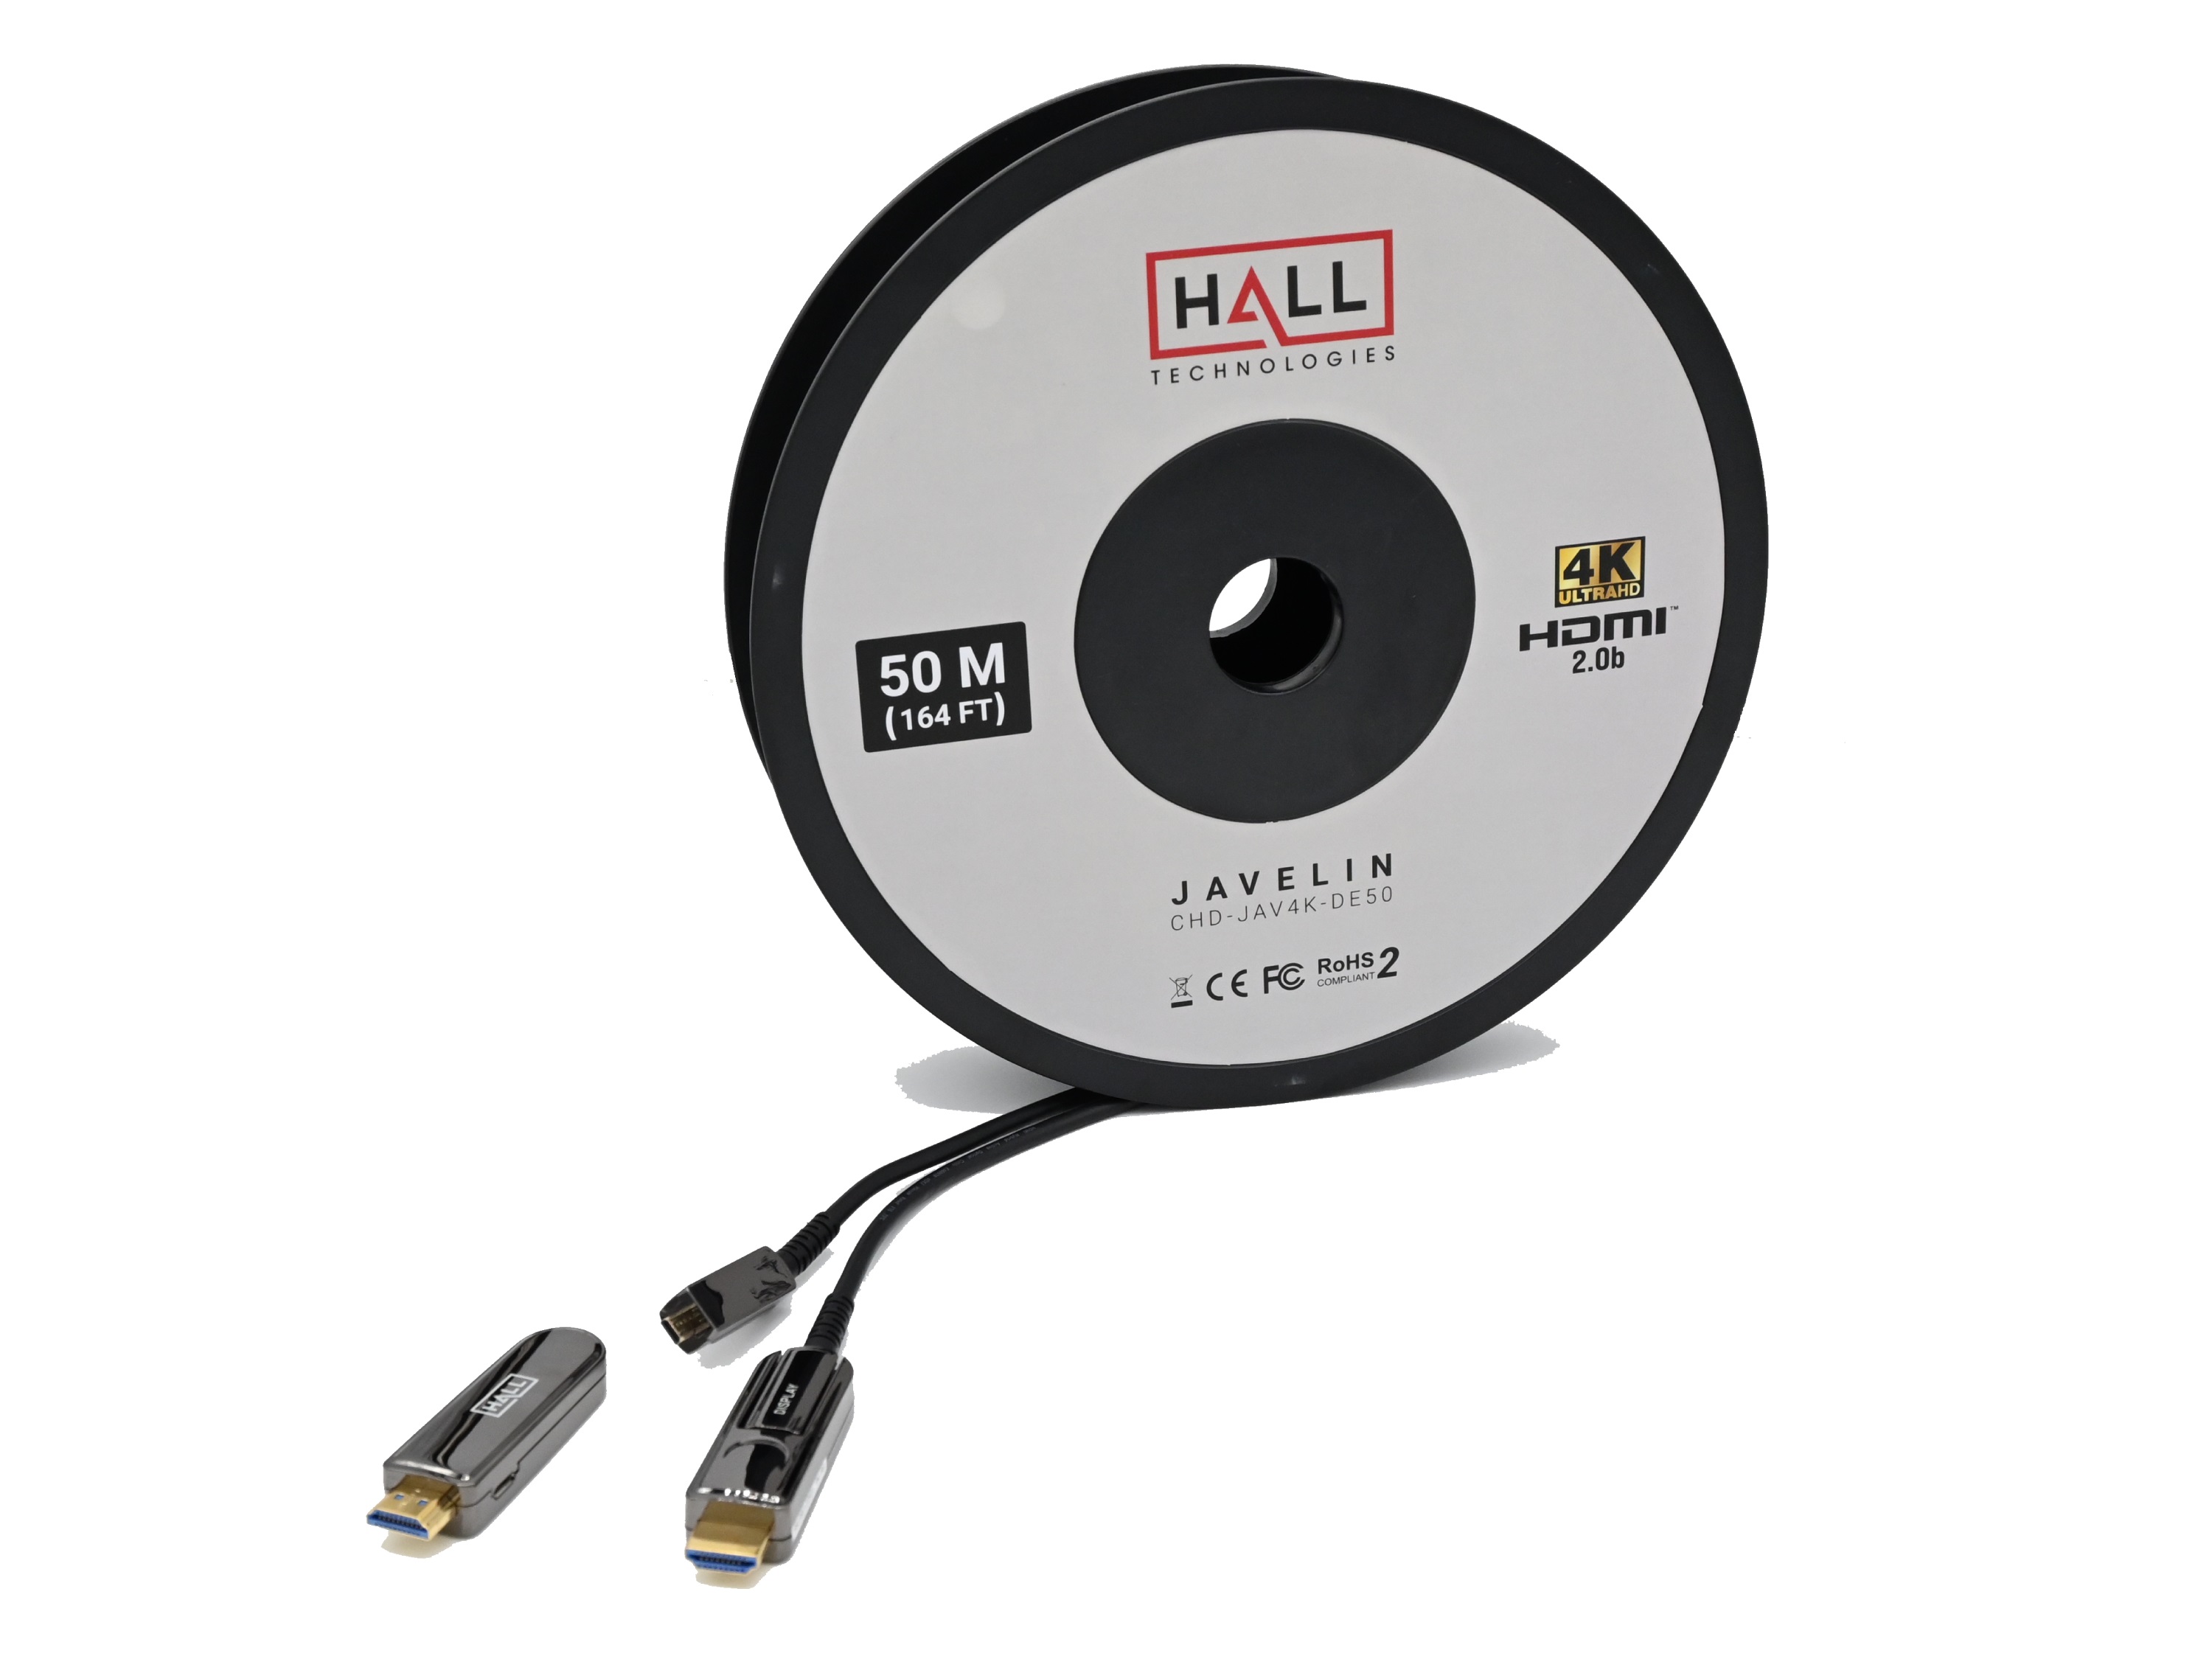 Hall Technologies CHD-JAV4K-DE25 25m/75ft 18 Gbps 4K Javelin Active Plenum HDMI Cable with Detachable Ends